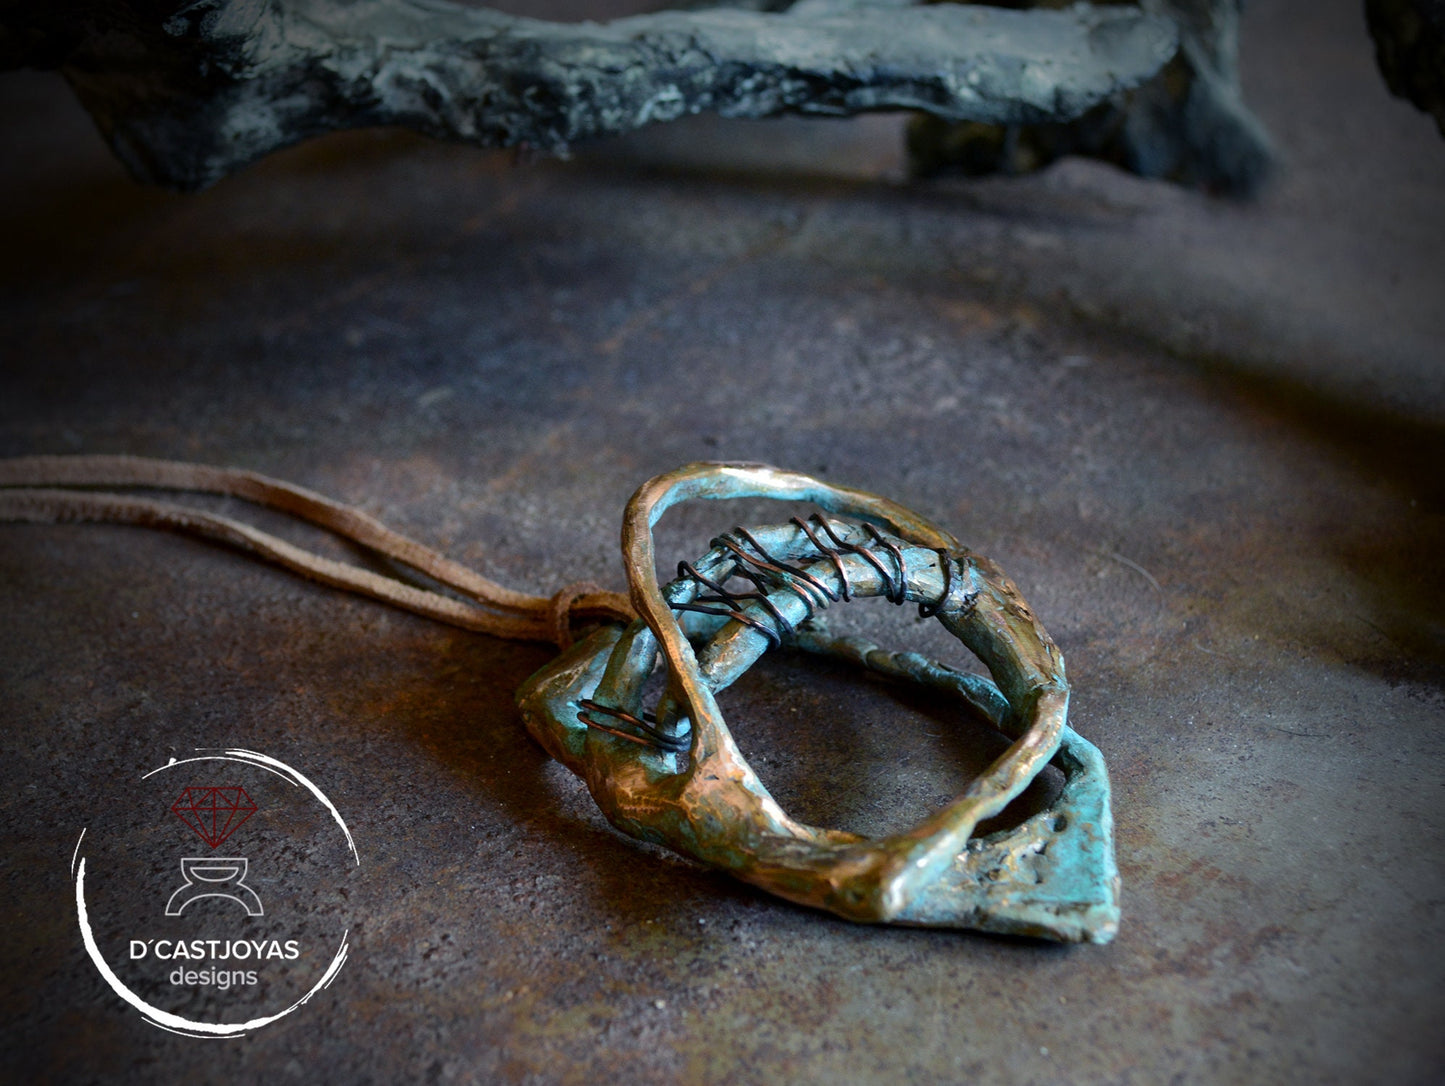 Artistic Galaxy pendant handmade in bronze with hammered textures, Contemporary Jewelry